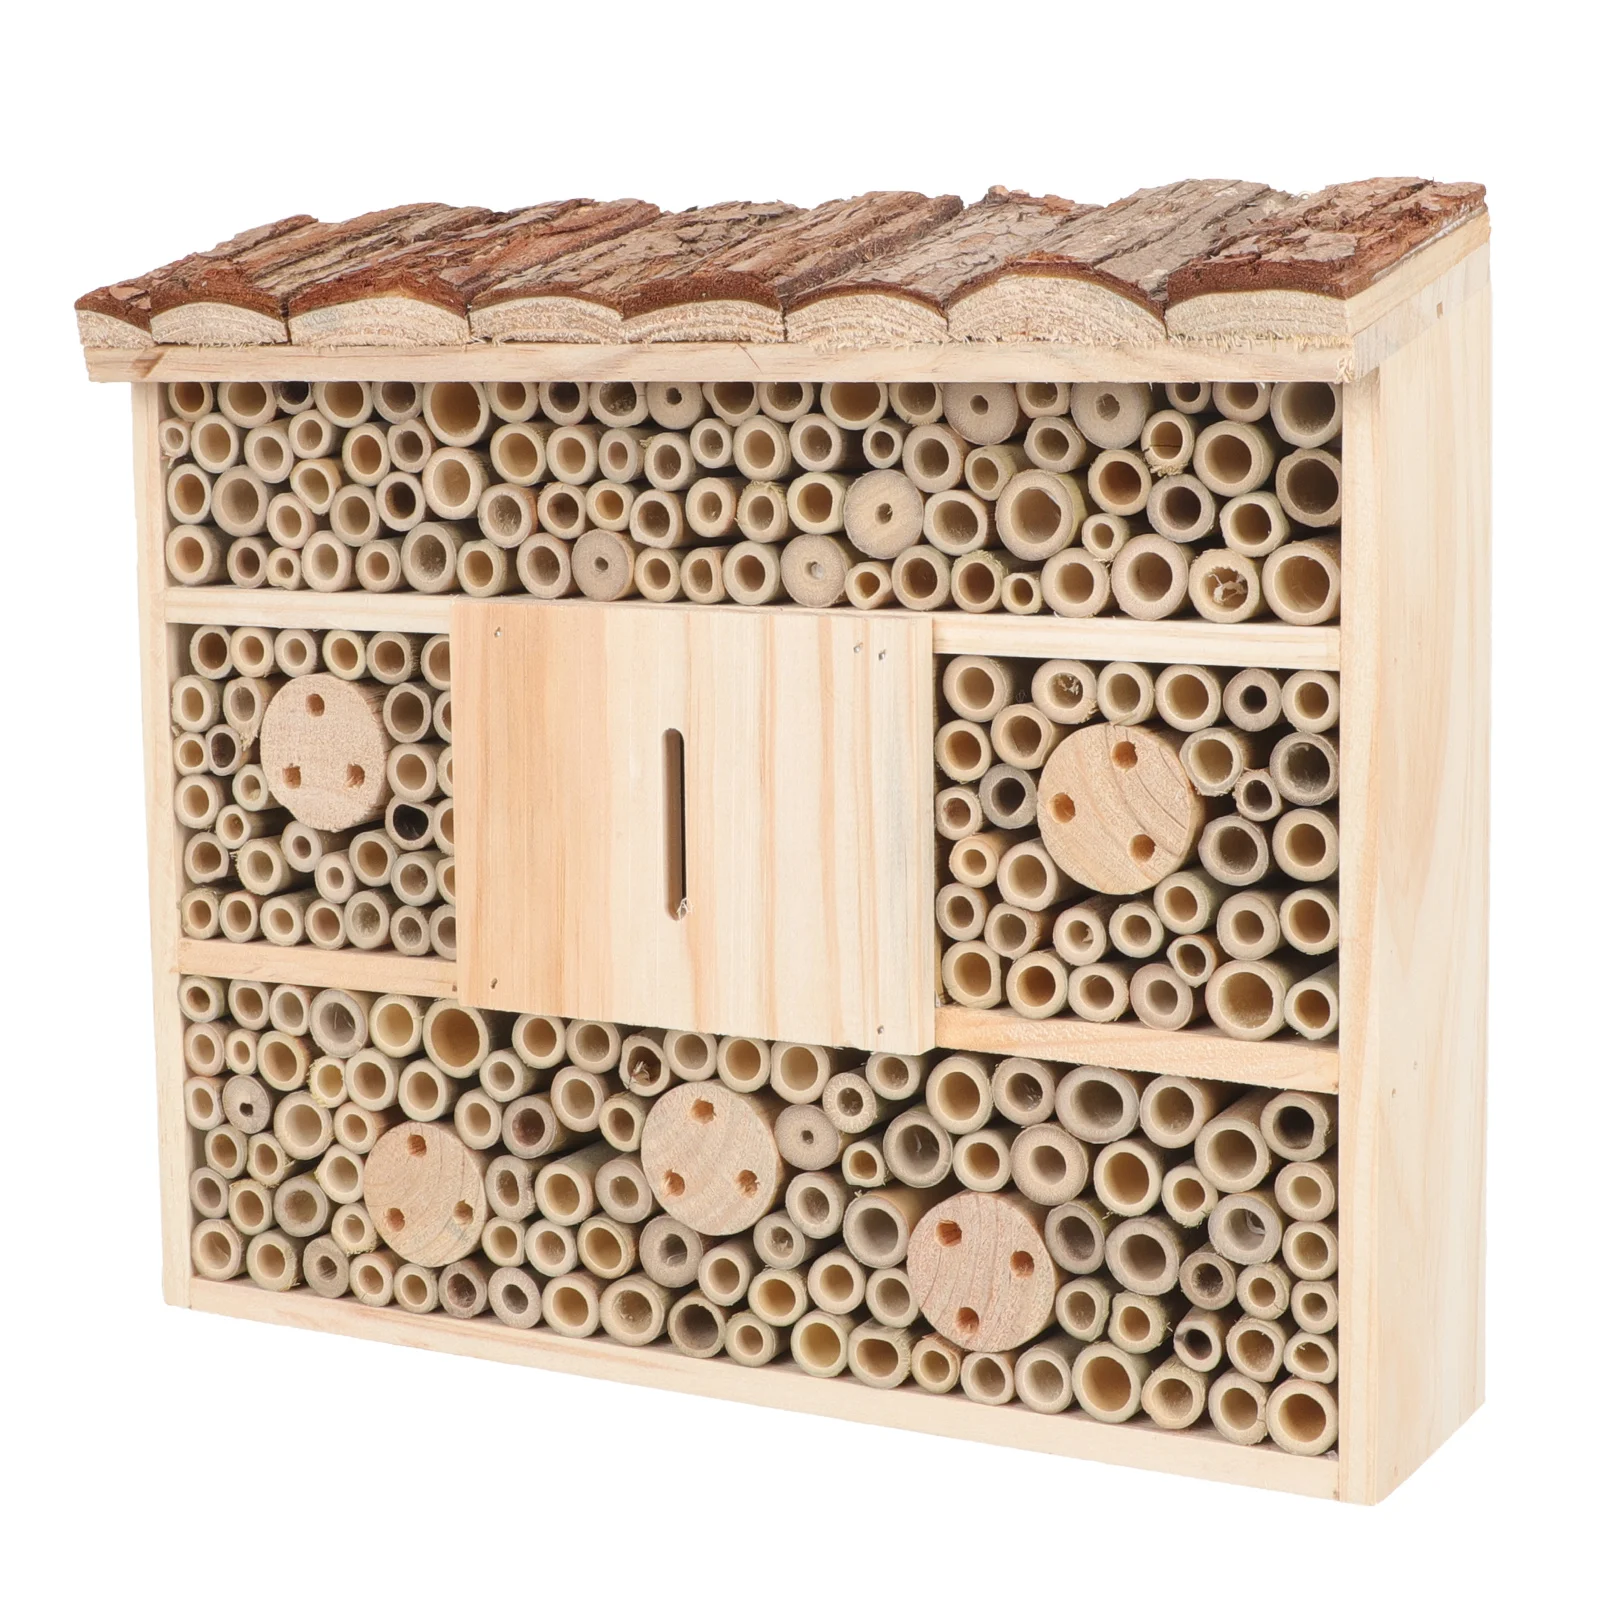 

Creative Insect House Beehive Decor Wooden Breeding Shelter Decorative Outdoor Ladybugs Cabin Room Hotel